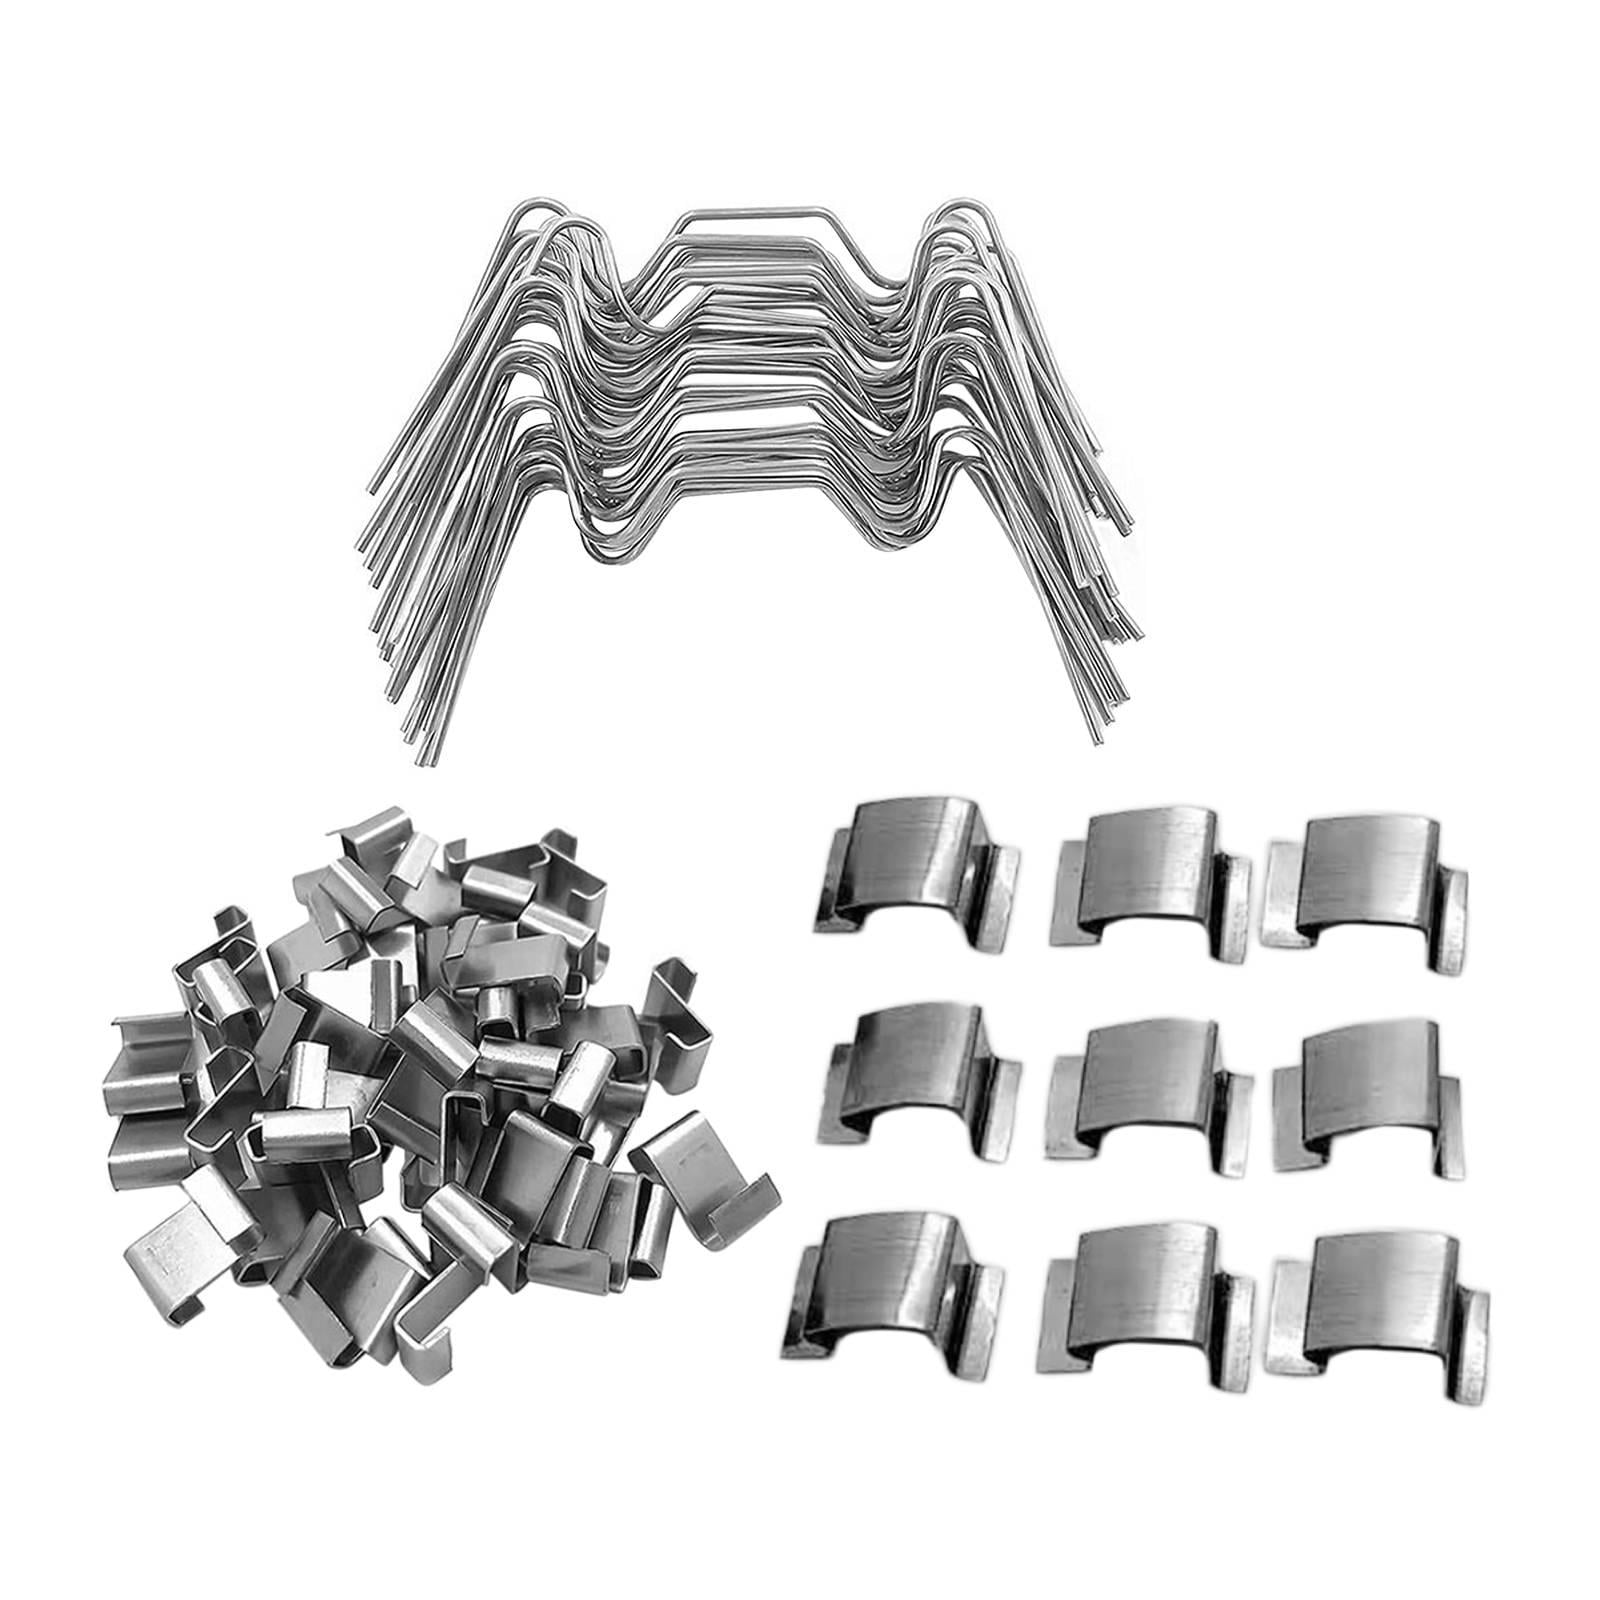 50 Stainless Steel Spring "G" Greenhouse Glazing Clips 